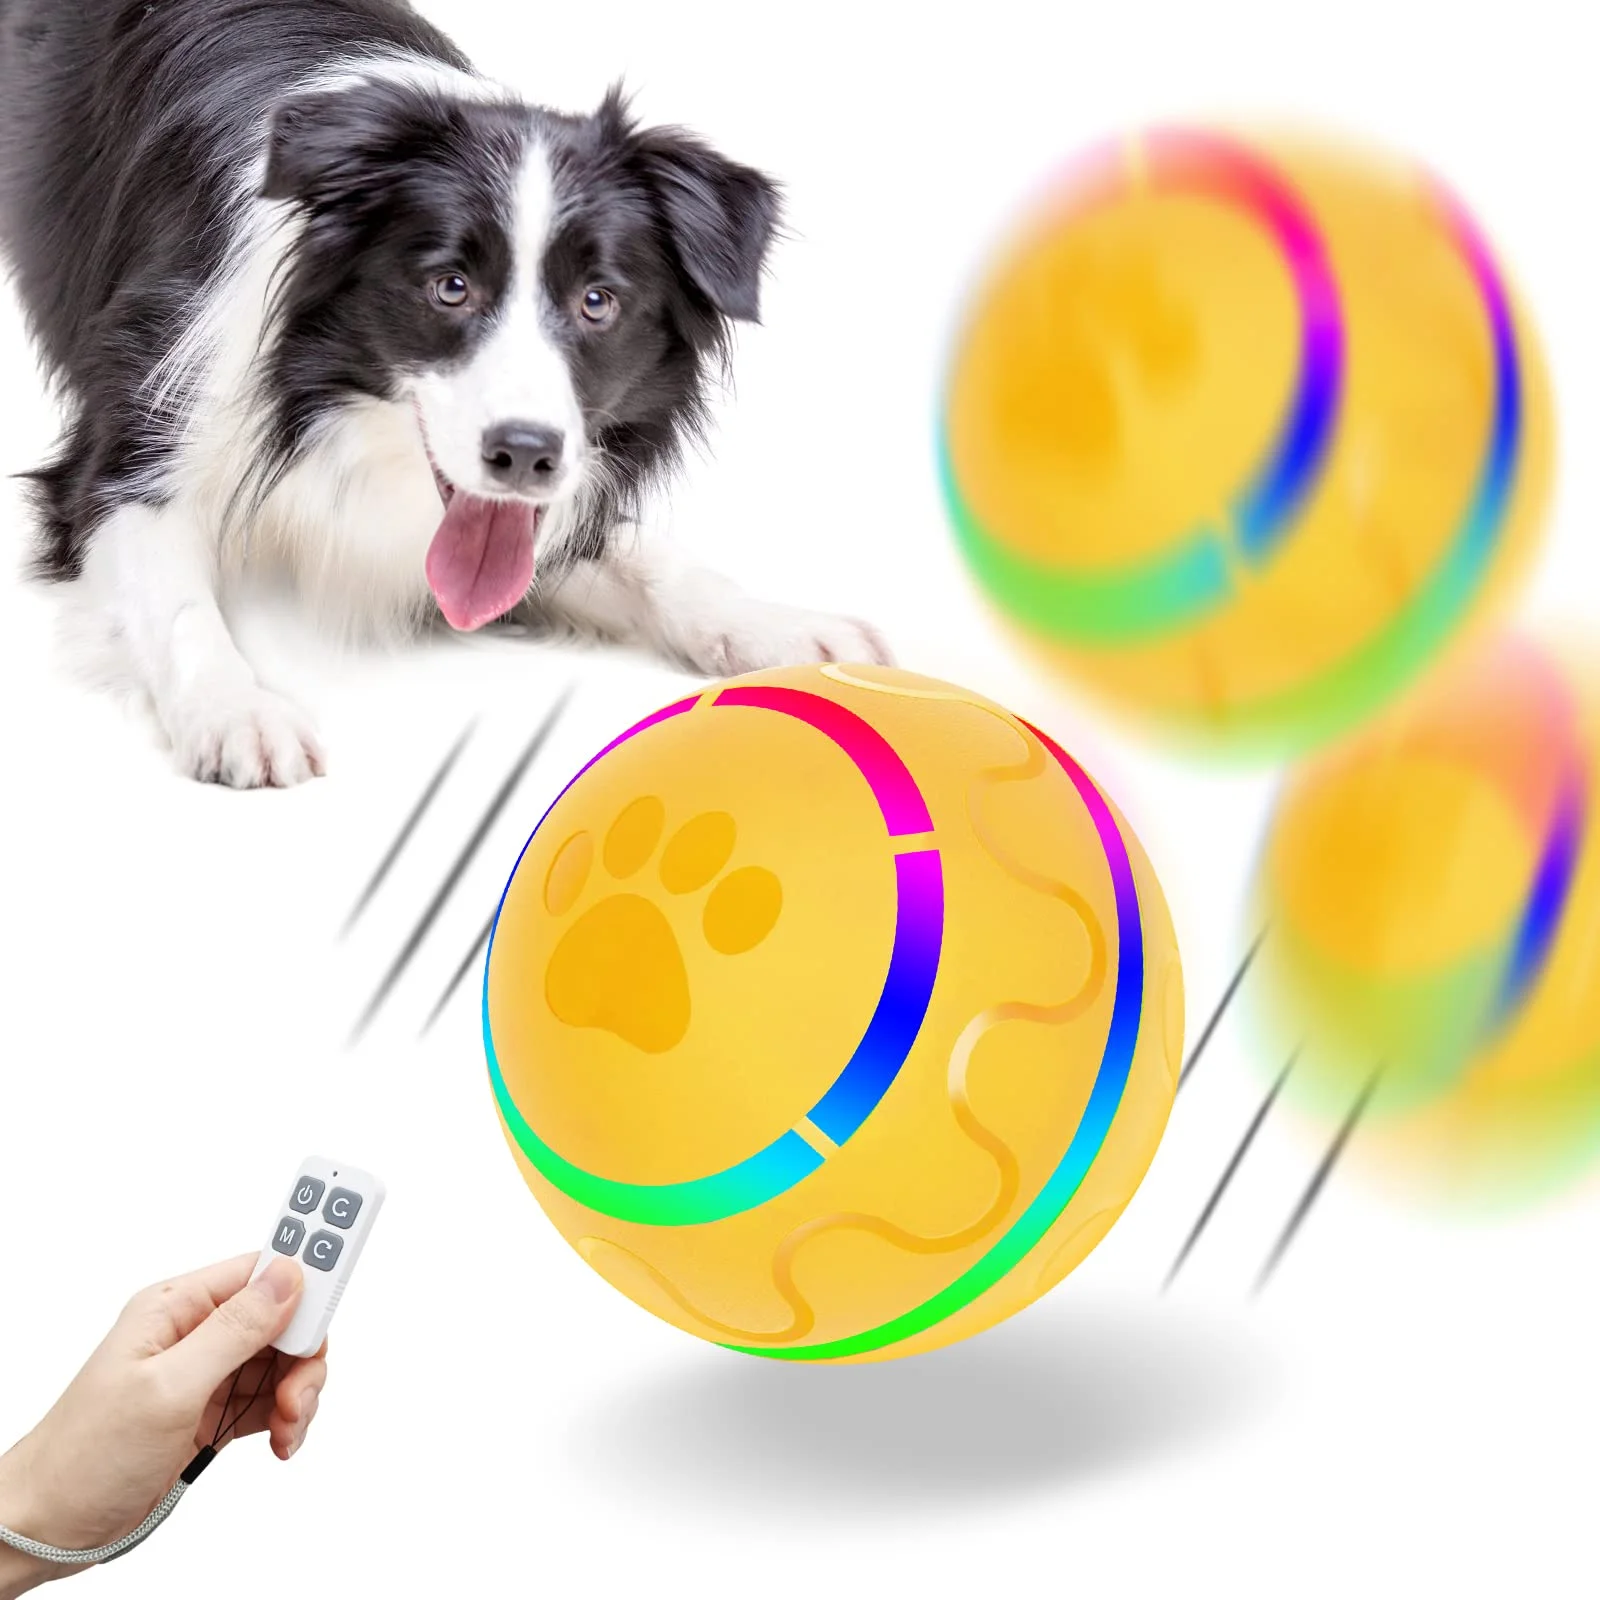 https://ae01.alicdn.com/kf/S5aa875e8749945f2a88311d2d3346dc4J/Electric-Pet-Toy-Dog-Cat-Interactive-Wicked-Ball-USB-Rechargeable-Funny-Automatic-Remote-Control-Rotating-Jumping.jpg